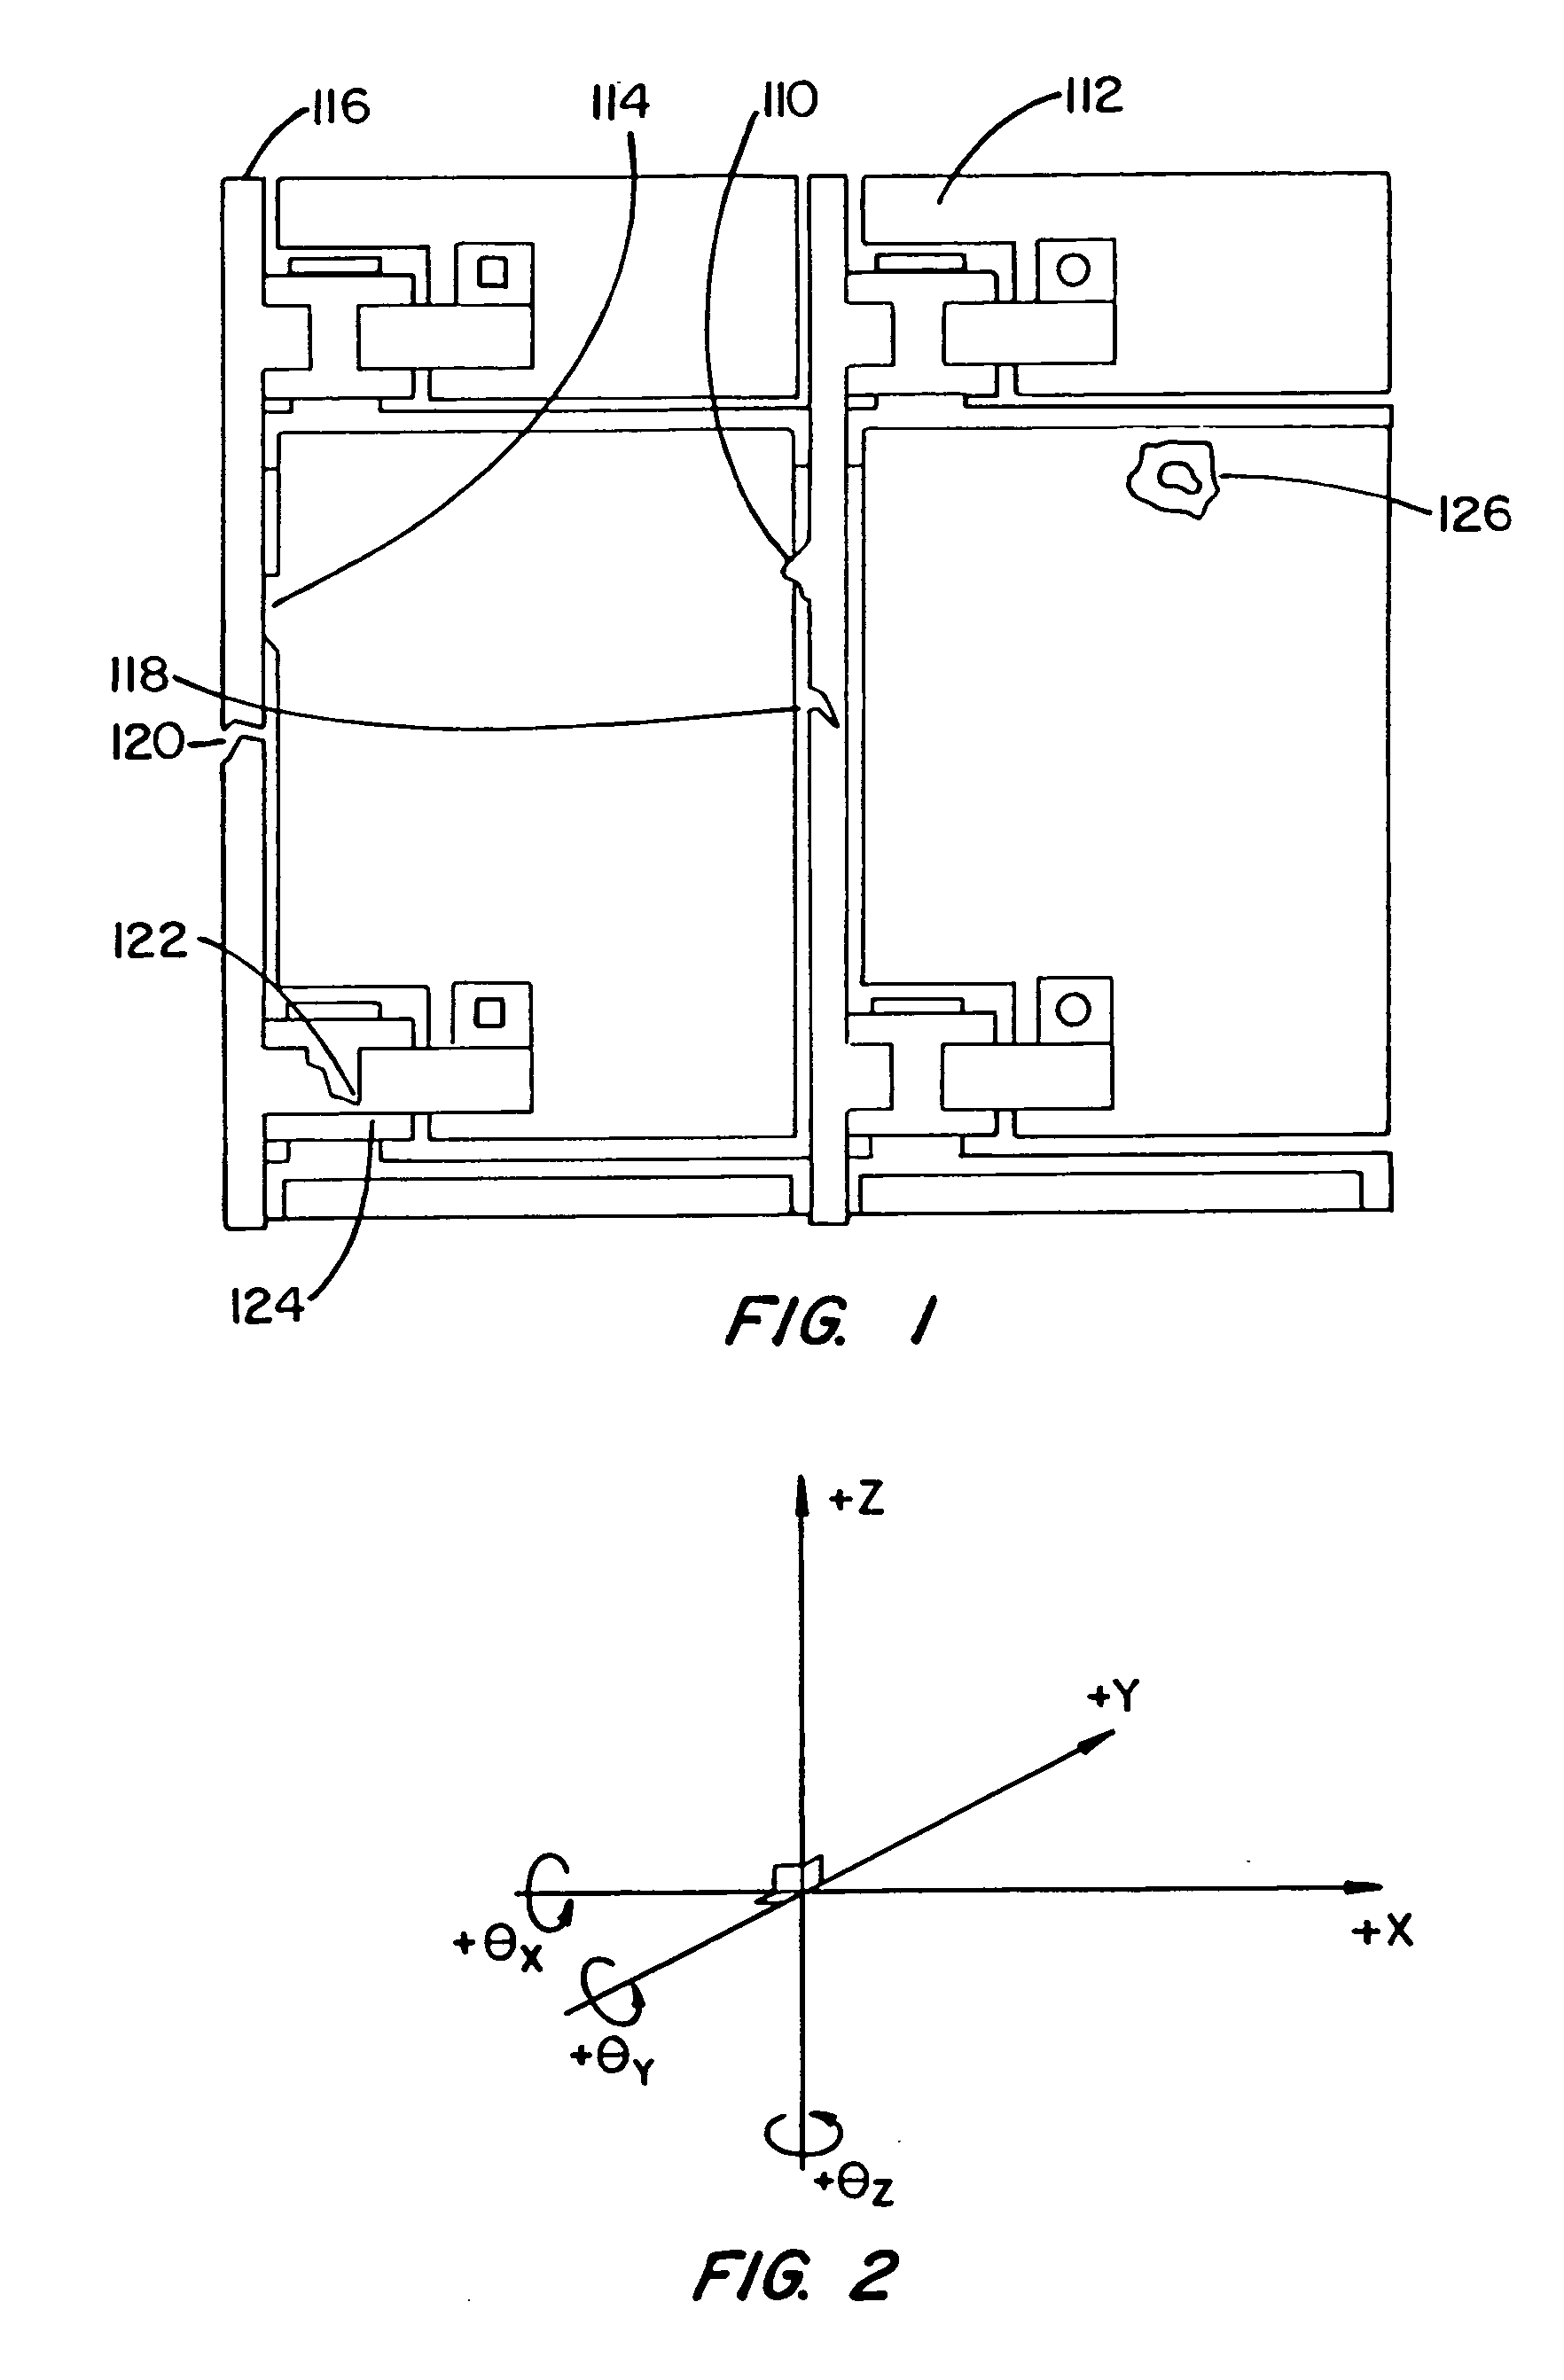 High precision gas bearing split-axis stage for transport and constraint of large flat flexible media during processing